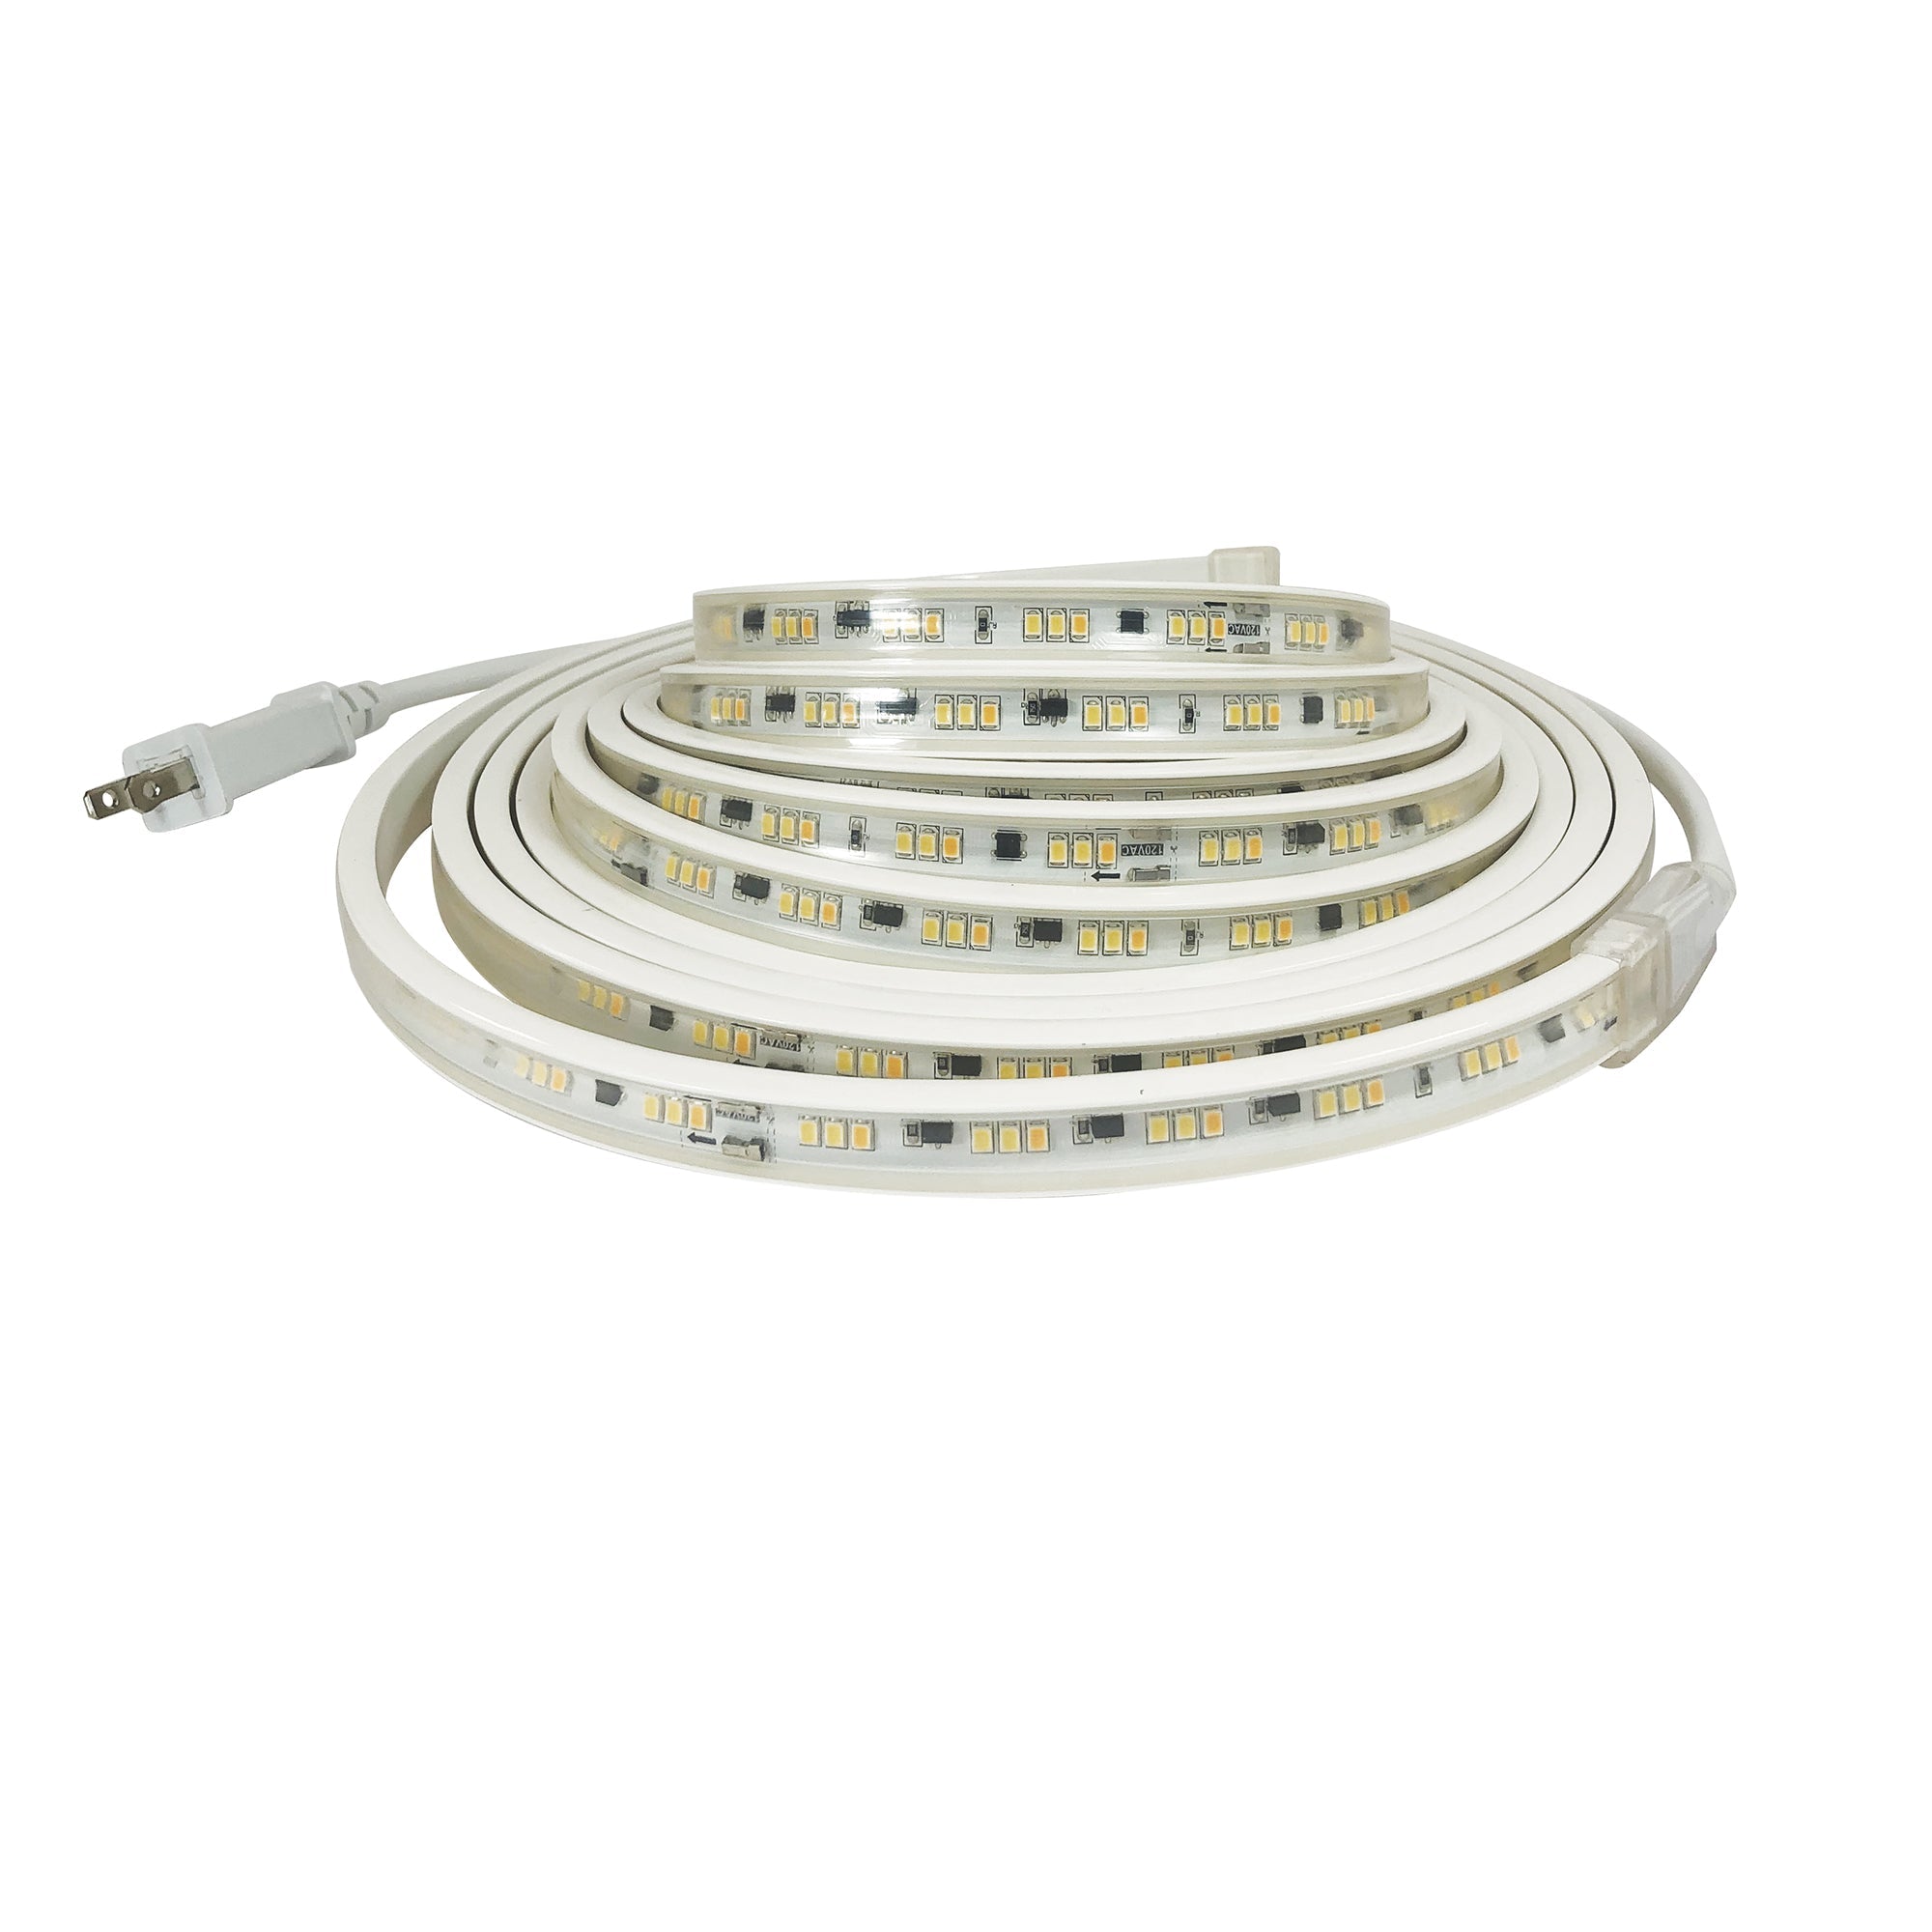 Nora Lighting NUTP13-W42-4-12-930/CP - Accent / Undercabinet - Custom Cut 42-ft, 4-in 120V Continuous LED Tape Light, 330lm / 3.6W per foot, 3000K, w/ Mounting Clips and 8' Cord & Plug